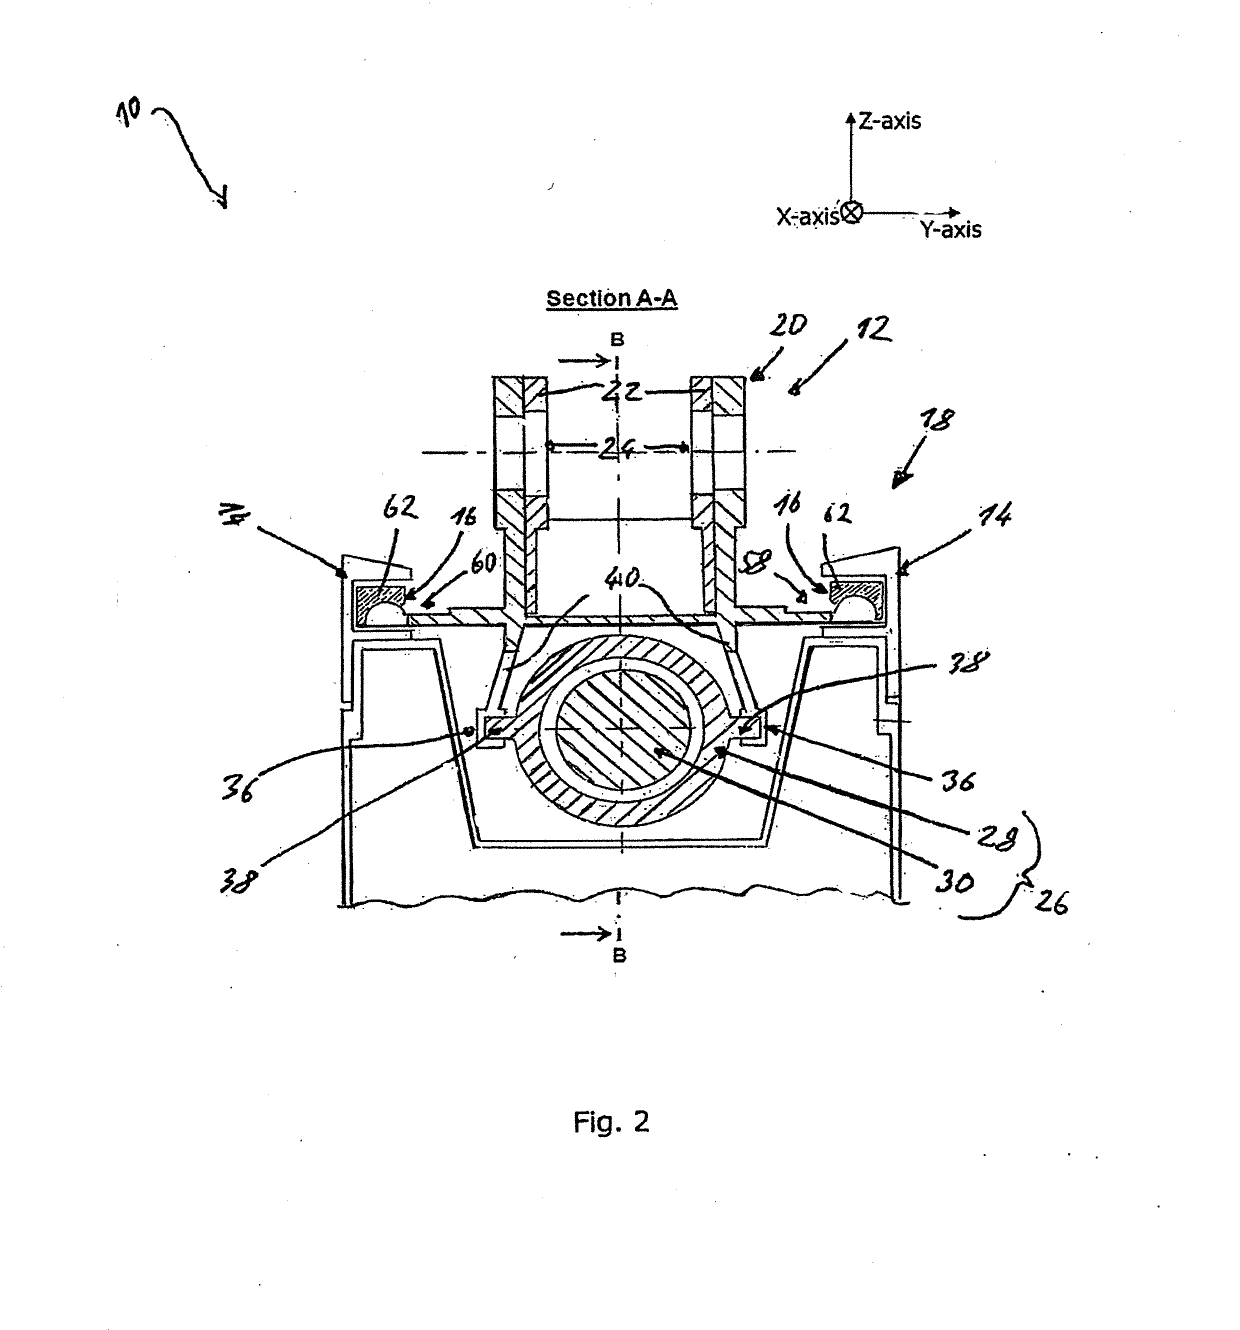 Flap actuating system for use in an aircraft